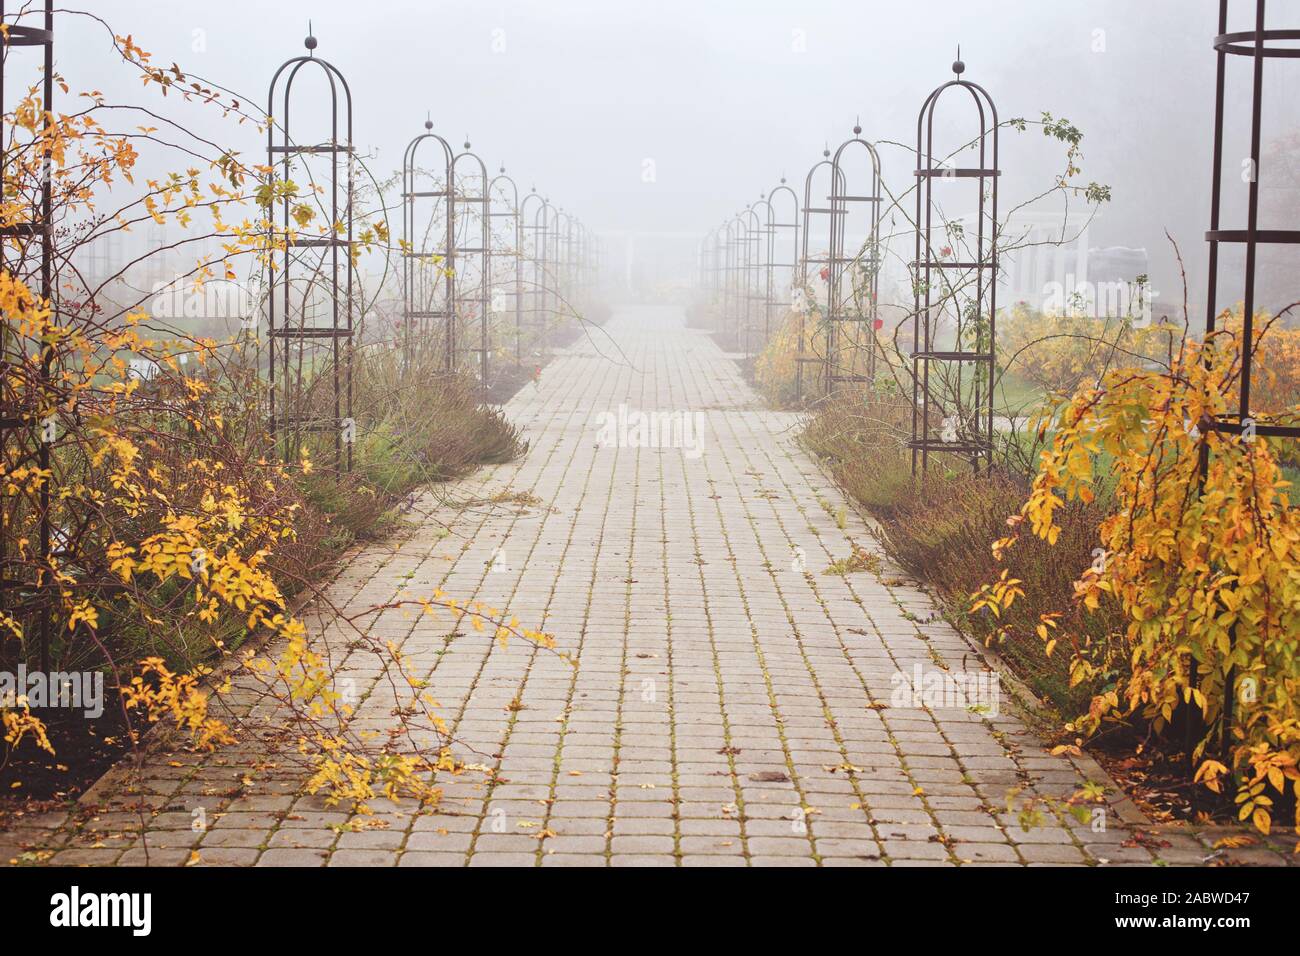 Misty November day in a botanical garden. Muted colors of autumn. Stock Photo